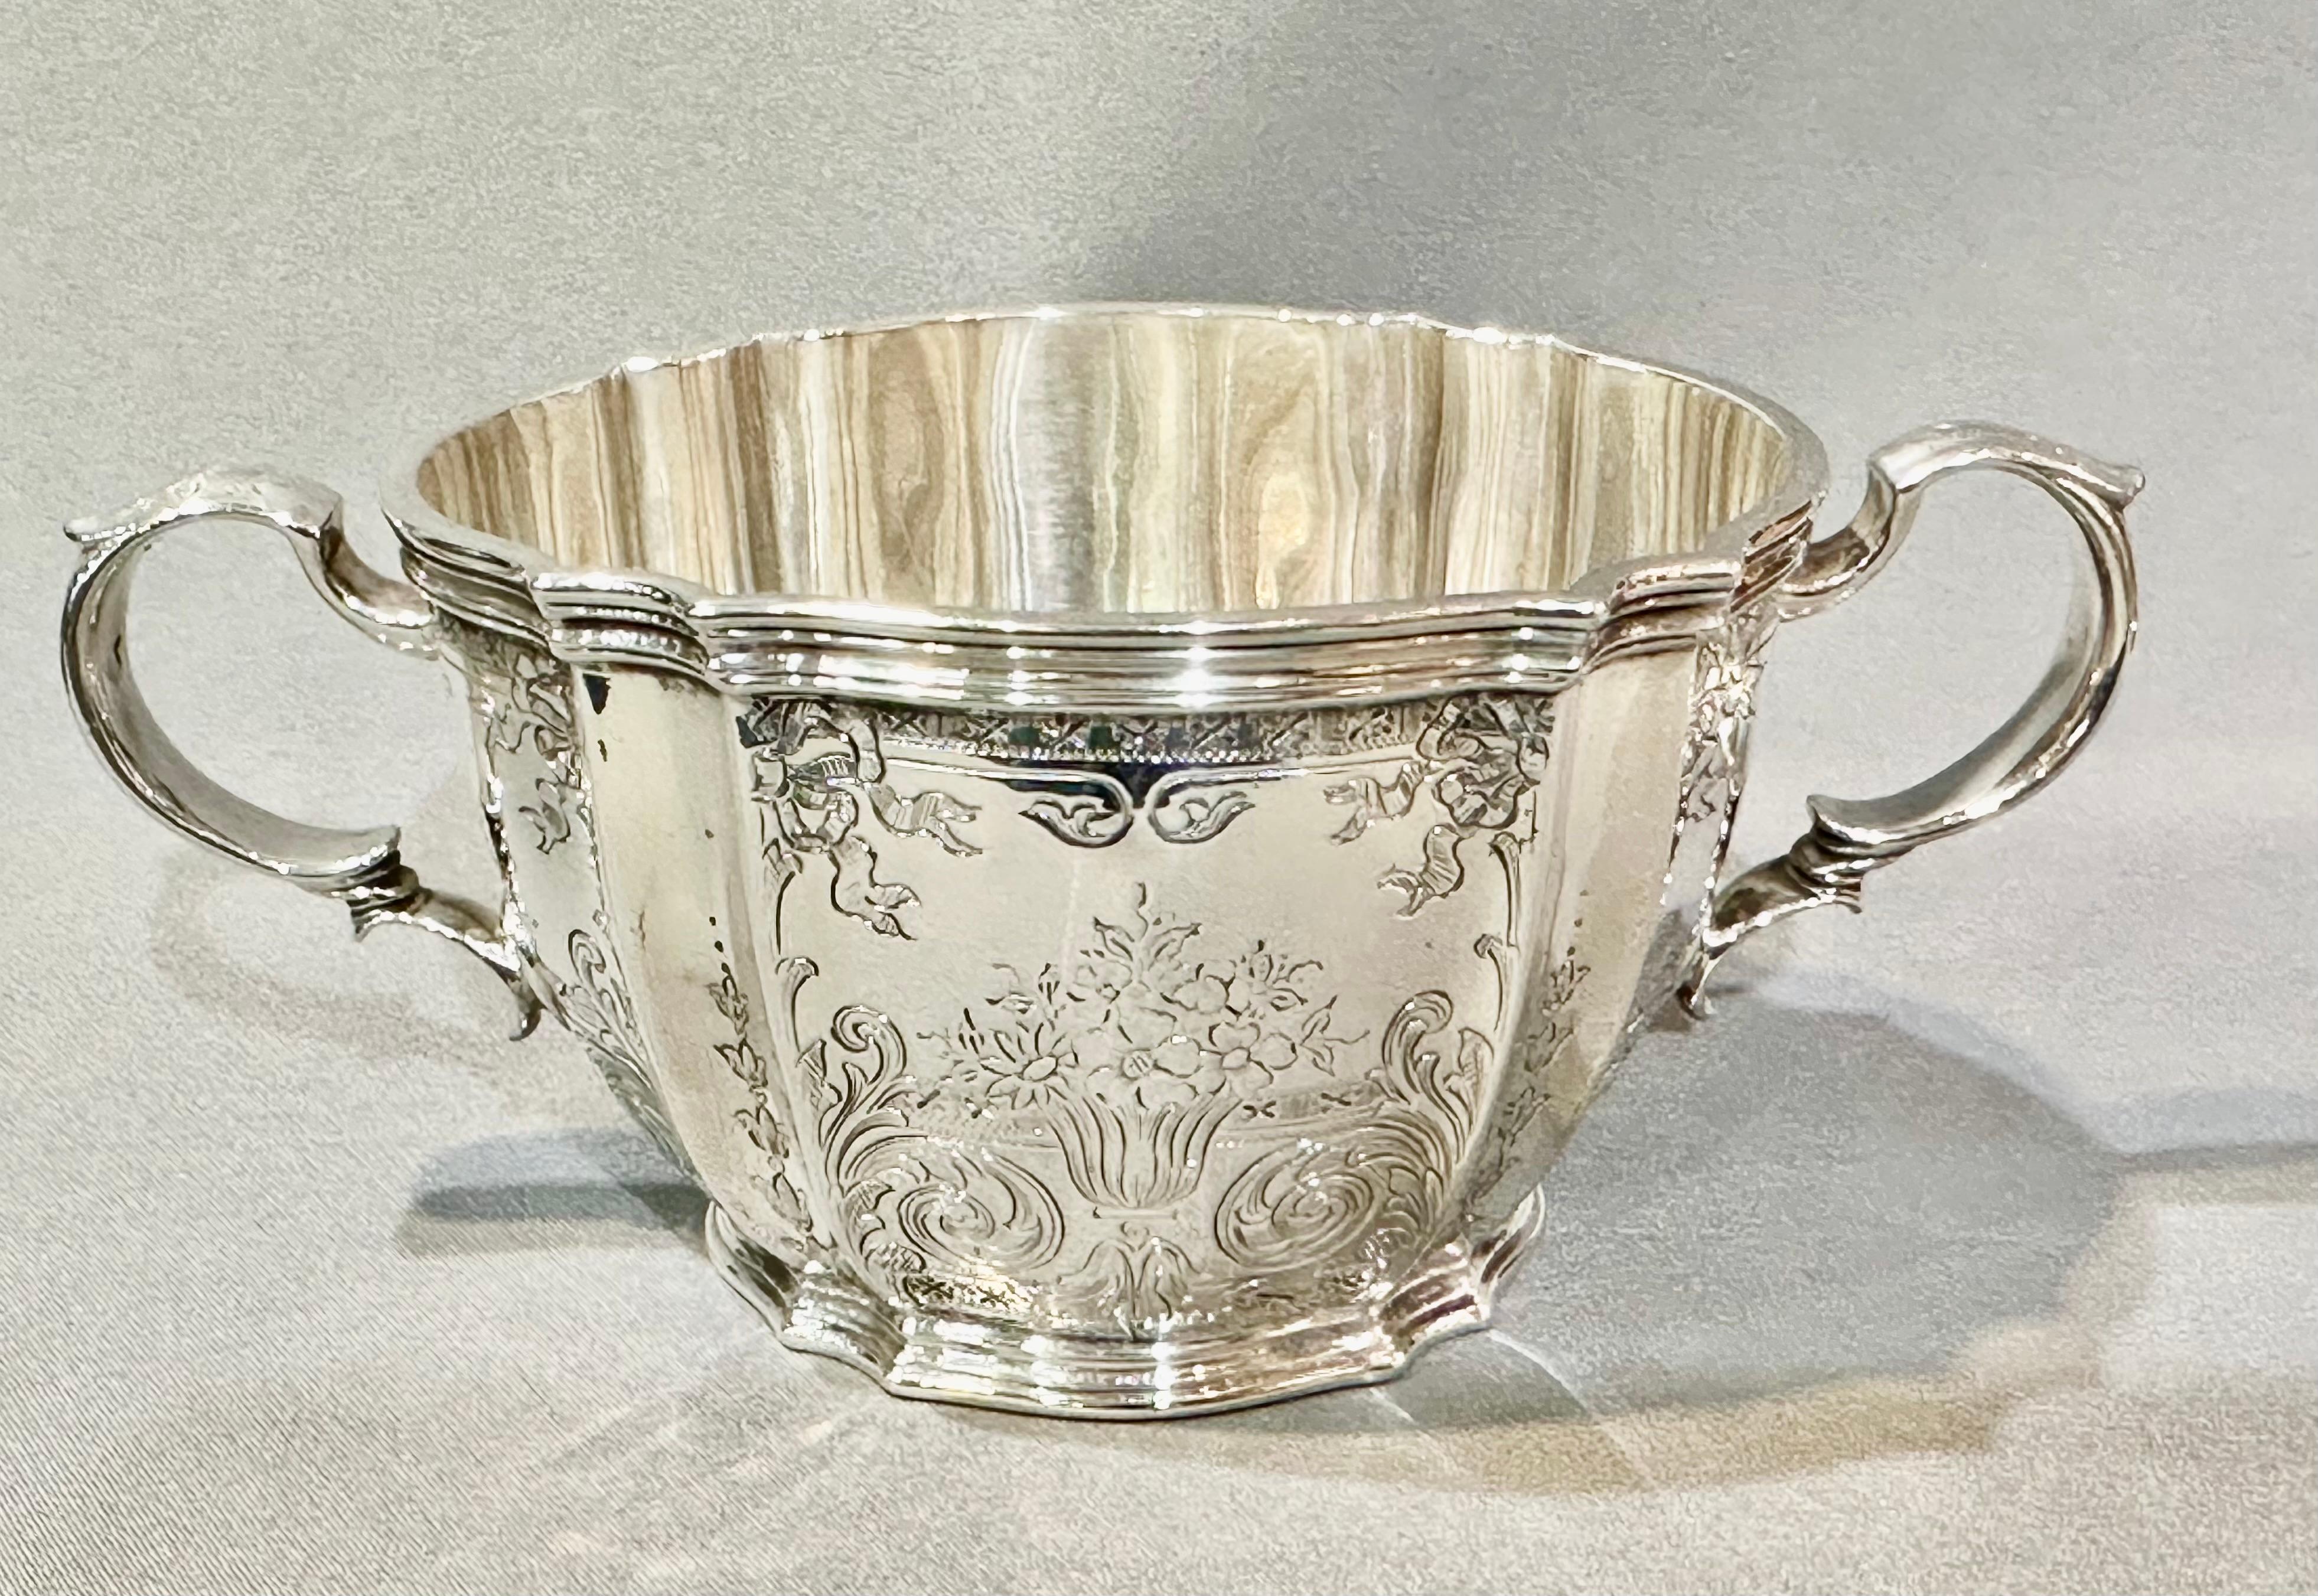 Early Victorian Tiffany Co Coffee/Tea Set  Antique Victorian Regency American Engraved Sterling  For Sale